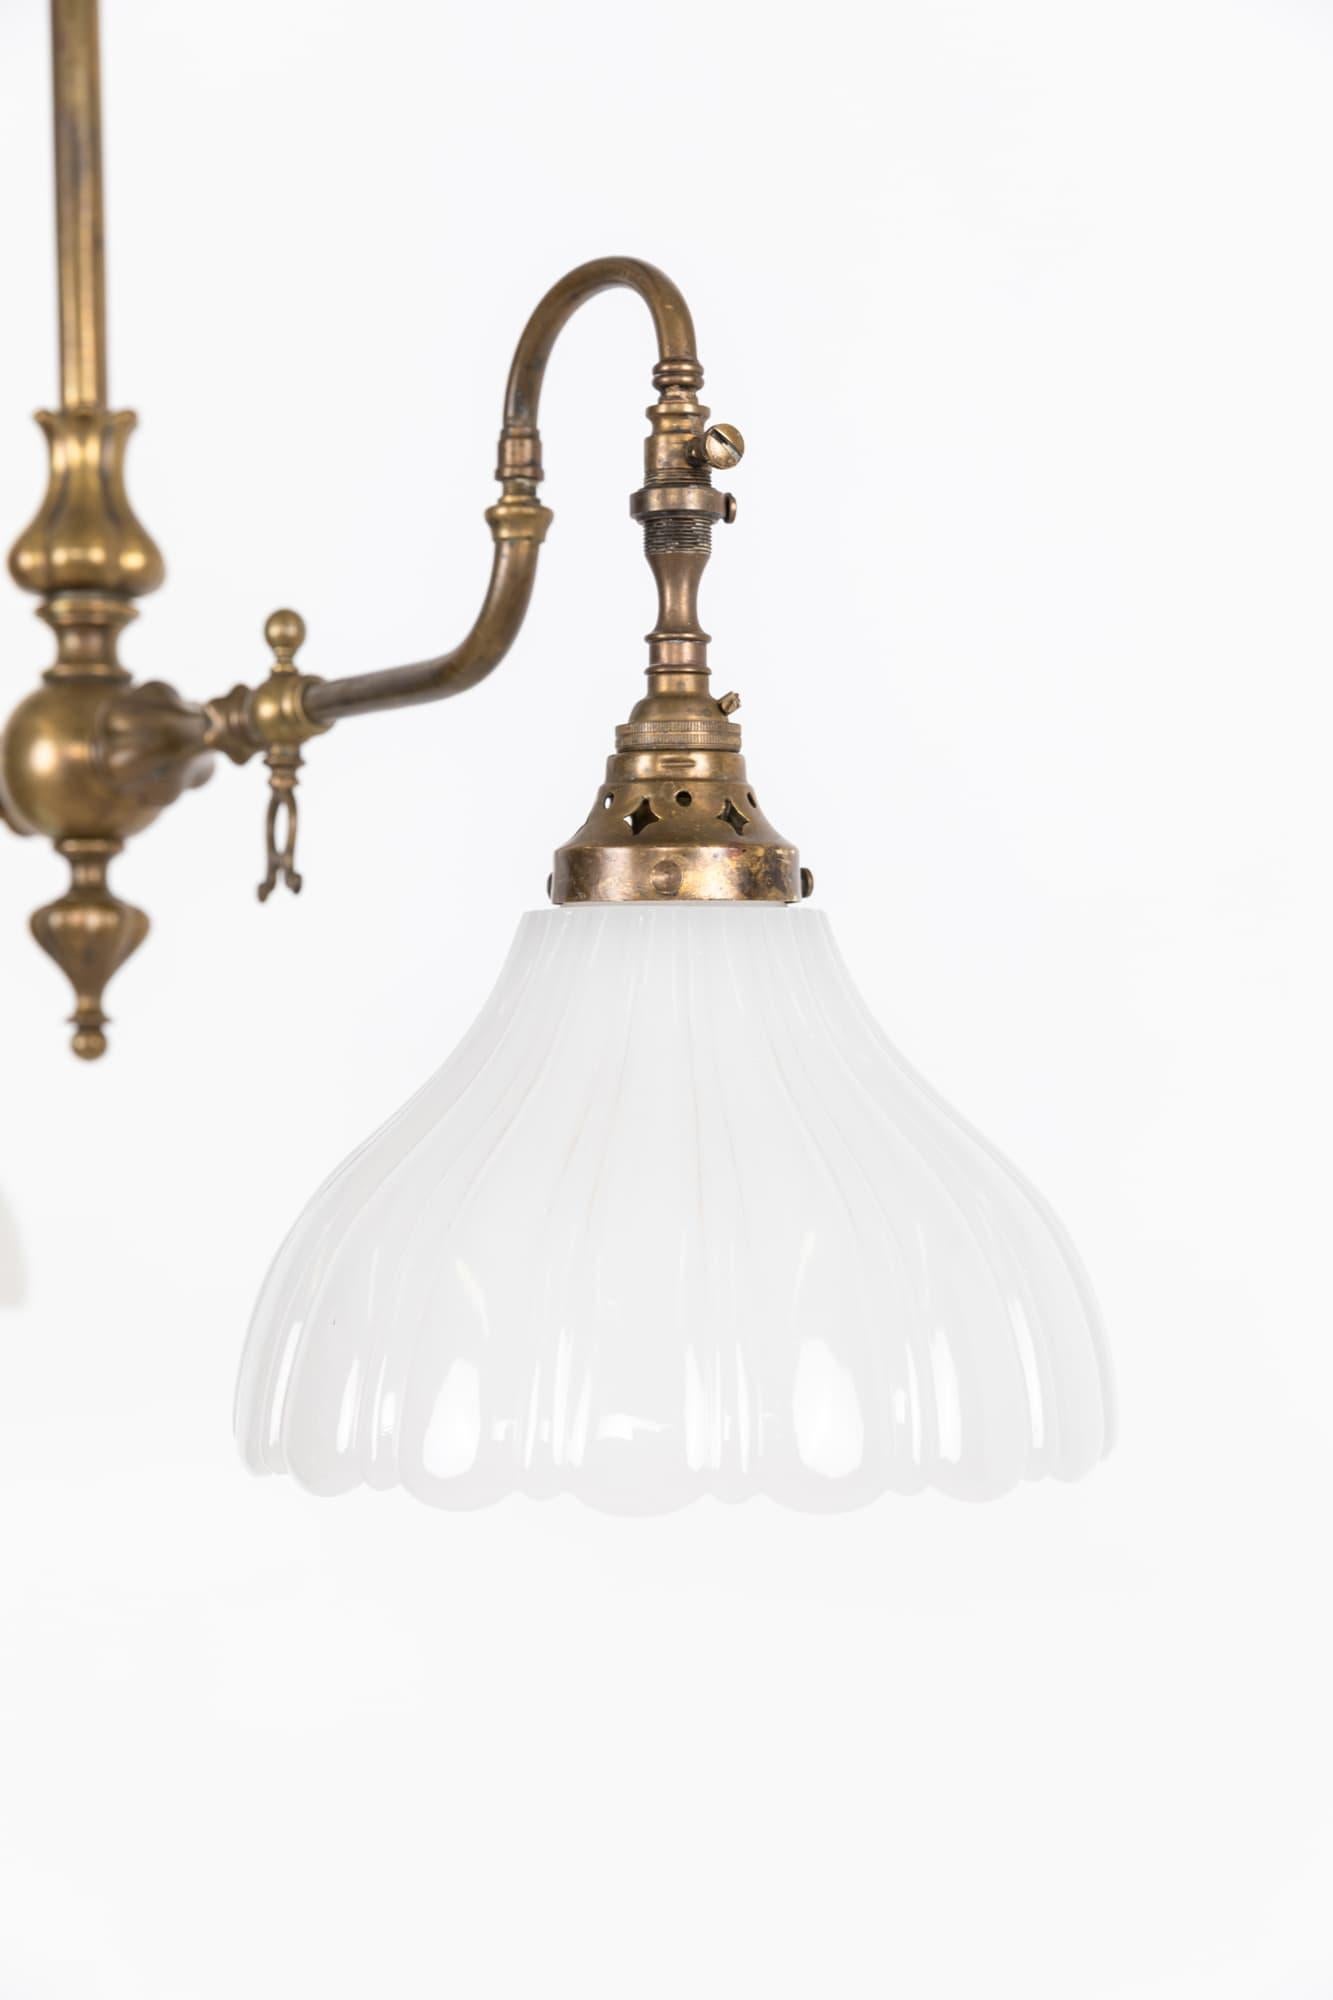 

An elegantly formed brass gasolier with pressed moonstone glass shades. c.1920

Beautifully designed former two-branch gasolier, now converted to electric. Central stem mounts directly to the ceiling.
